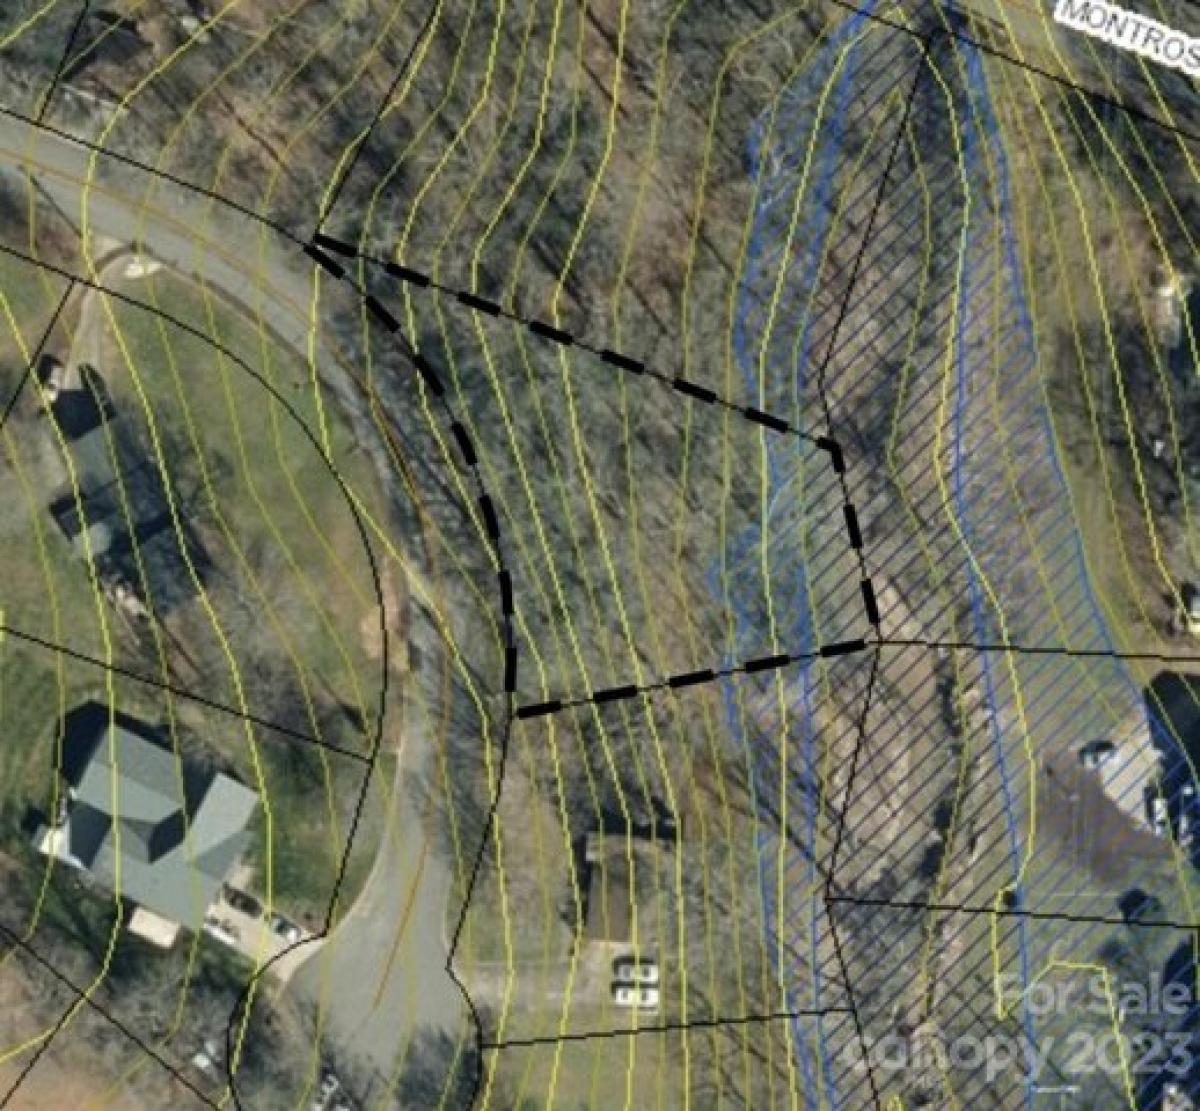 Picture of Residential Land For Sale in Shelby, North Carolina, United States